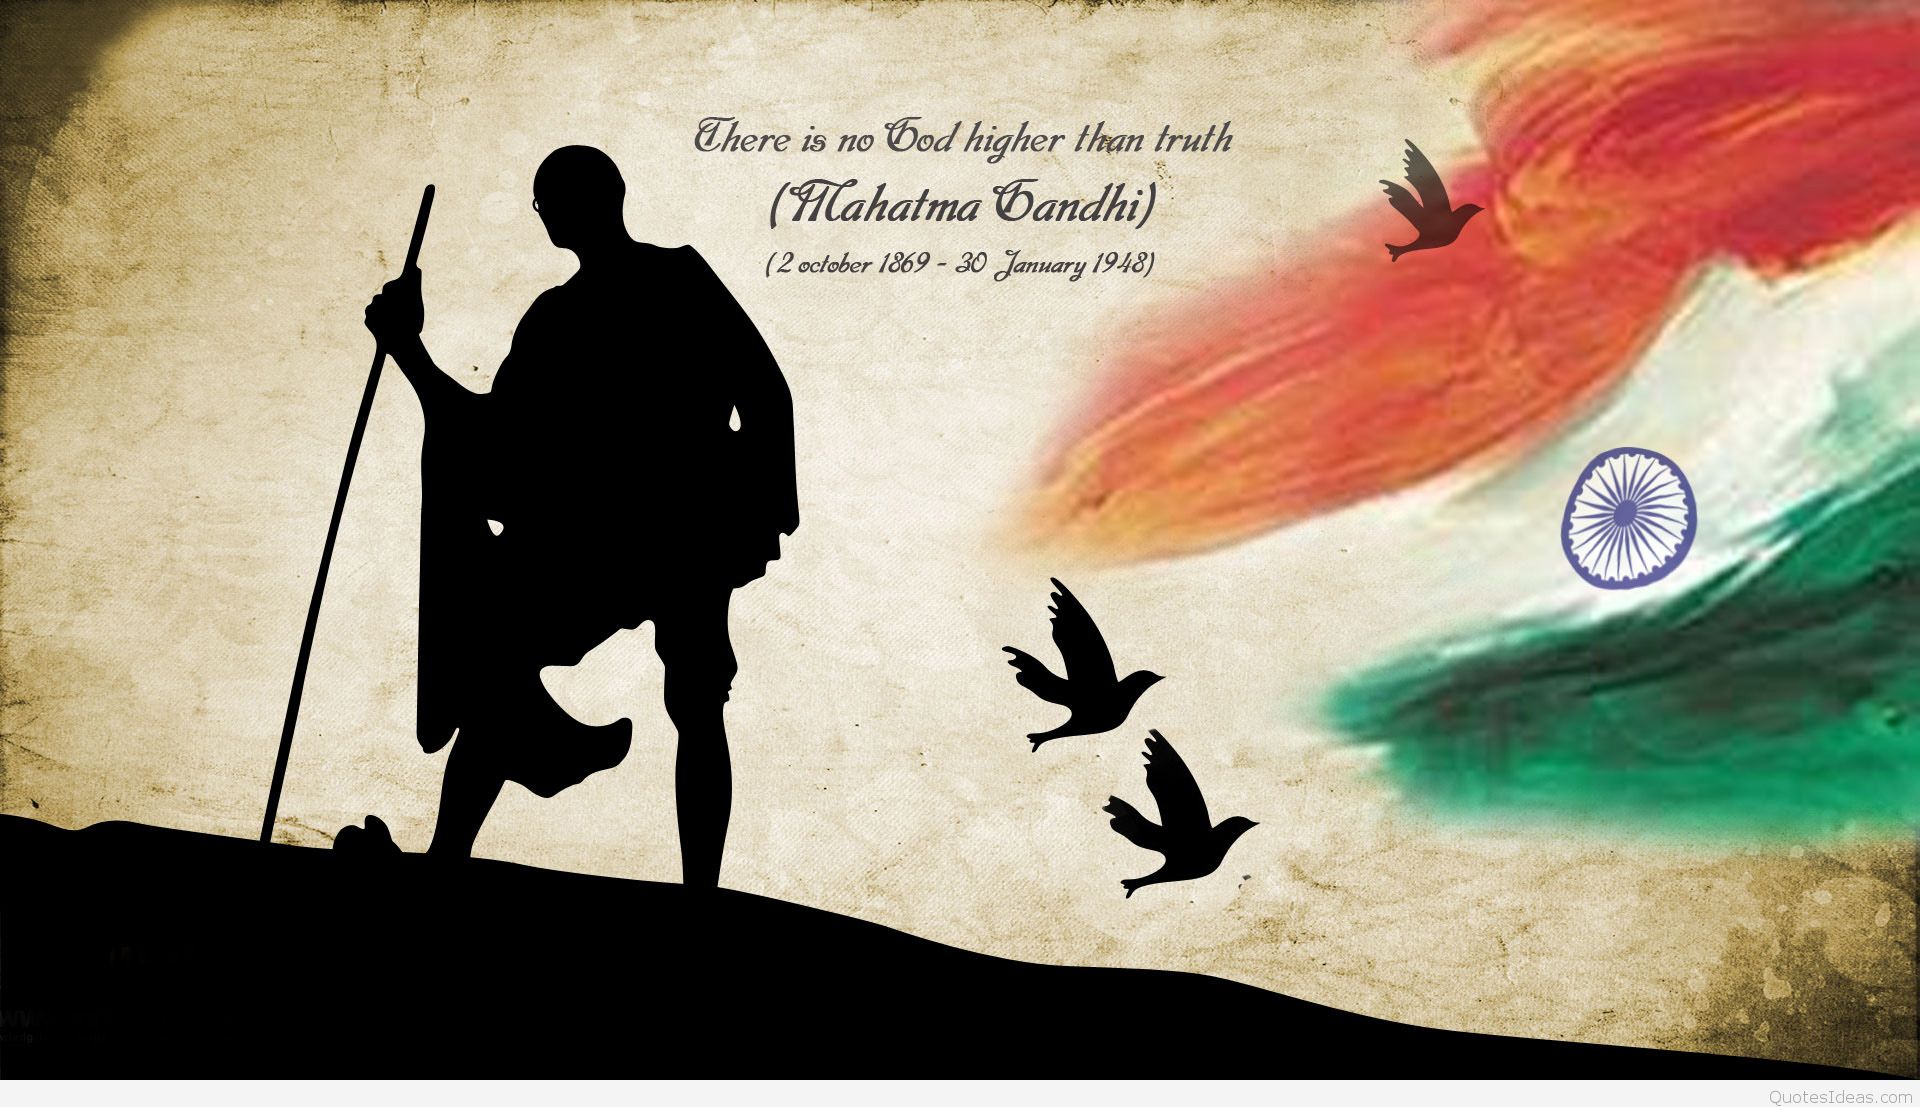 Quotes Mahatma Ghandi Best Image And Wallpaper